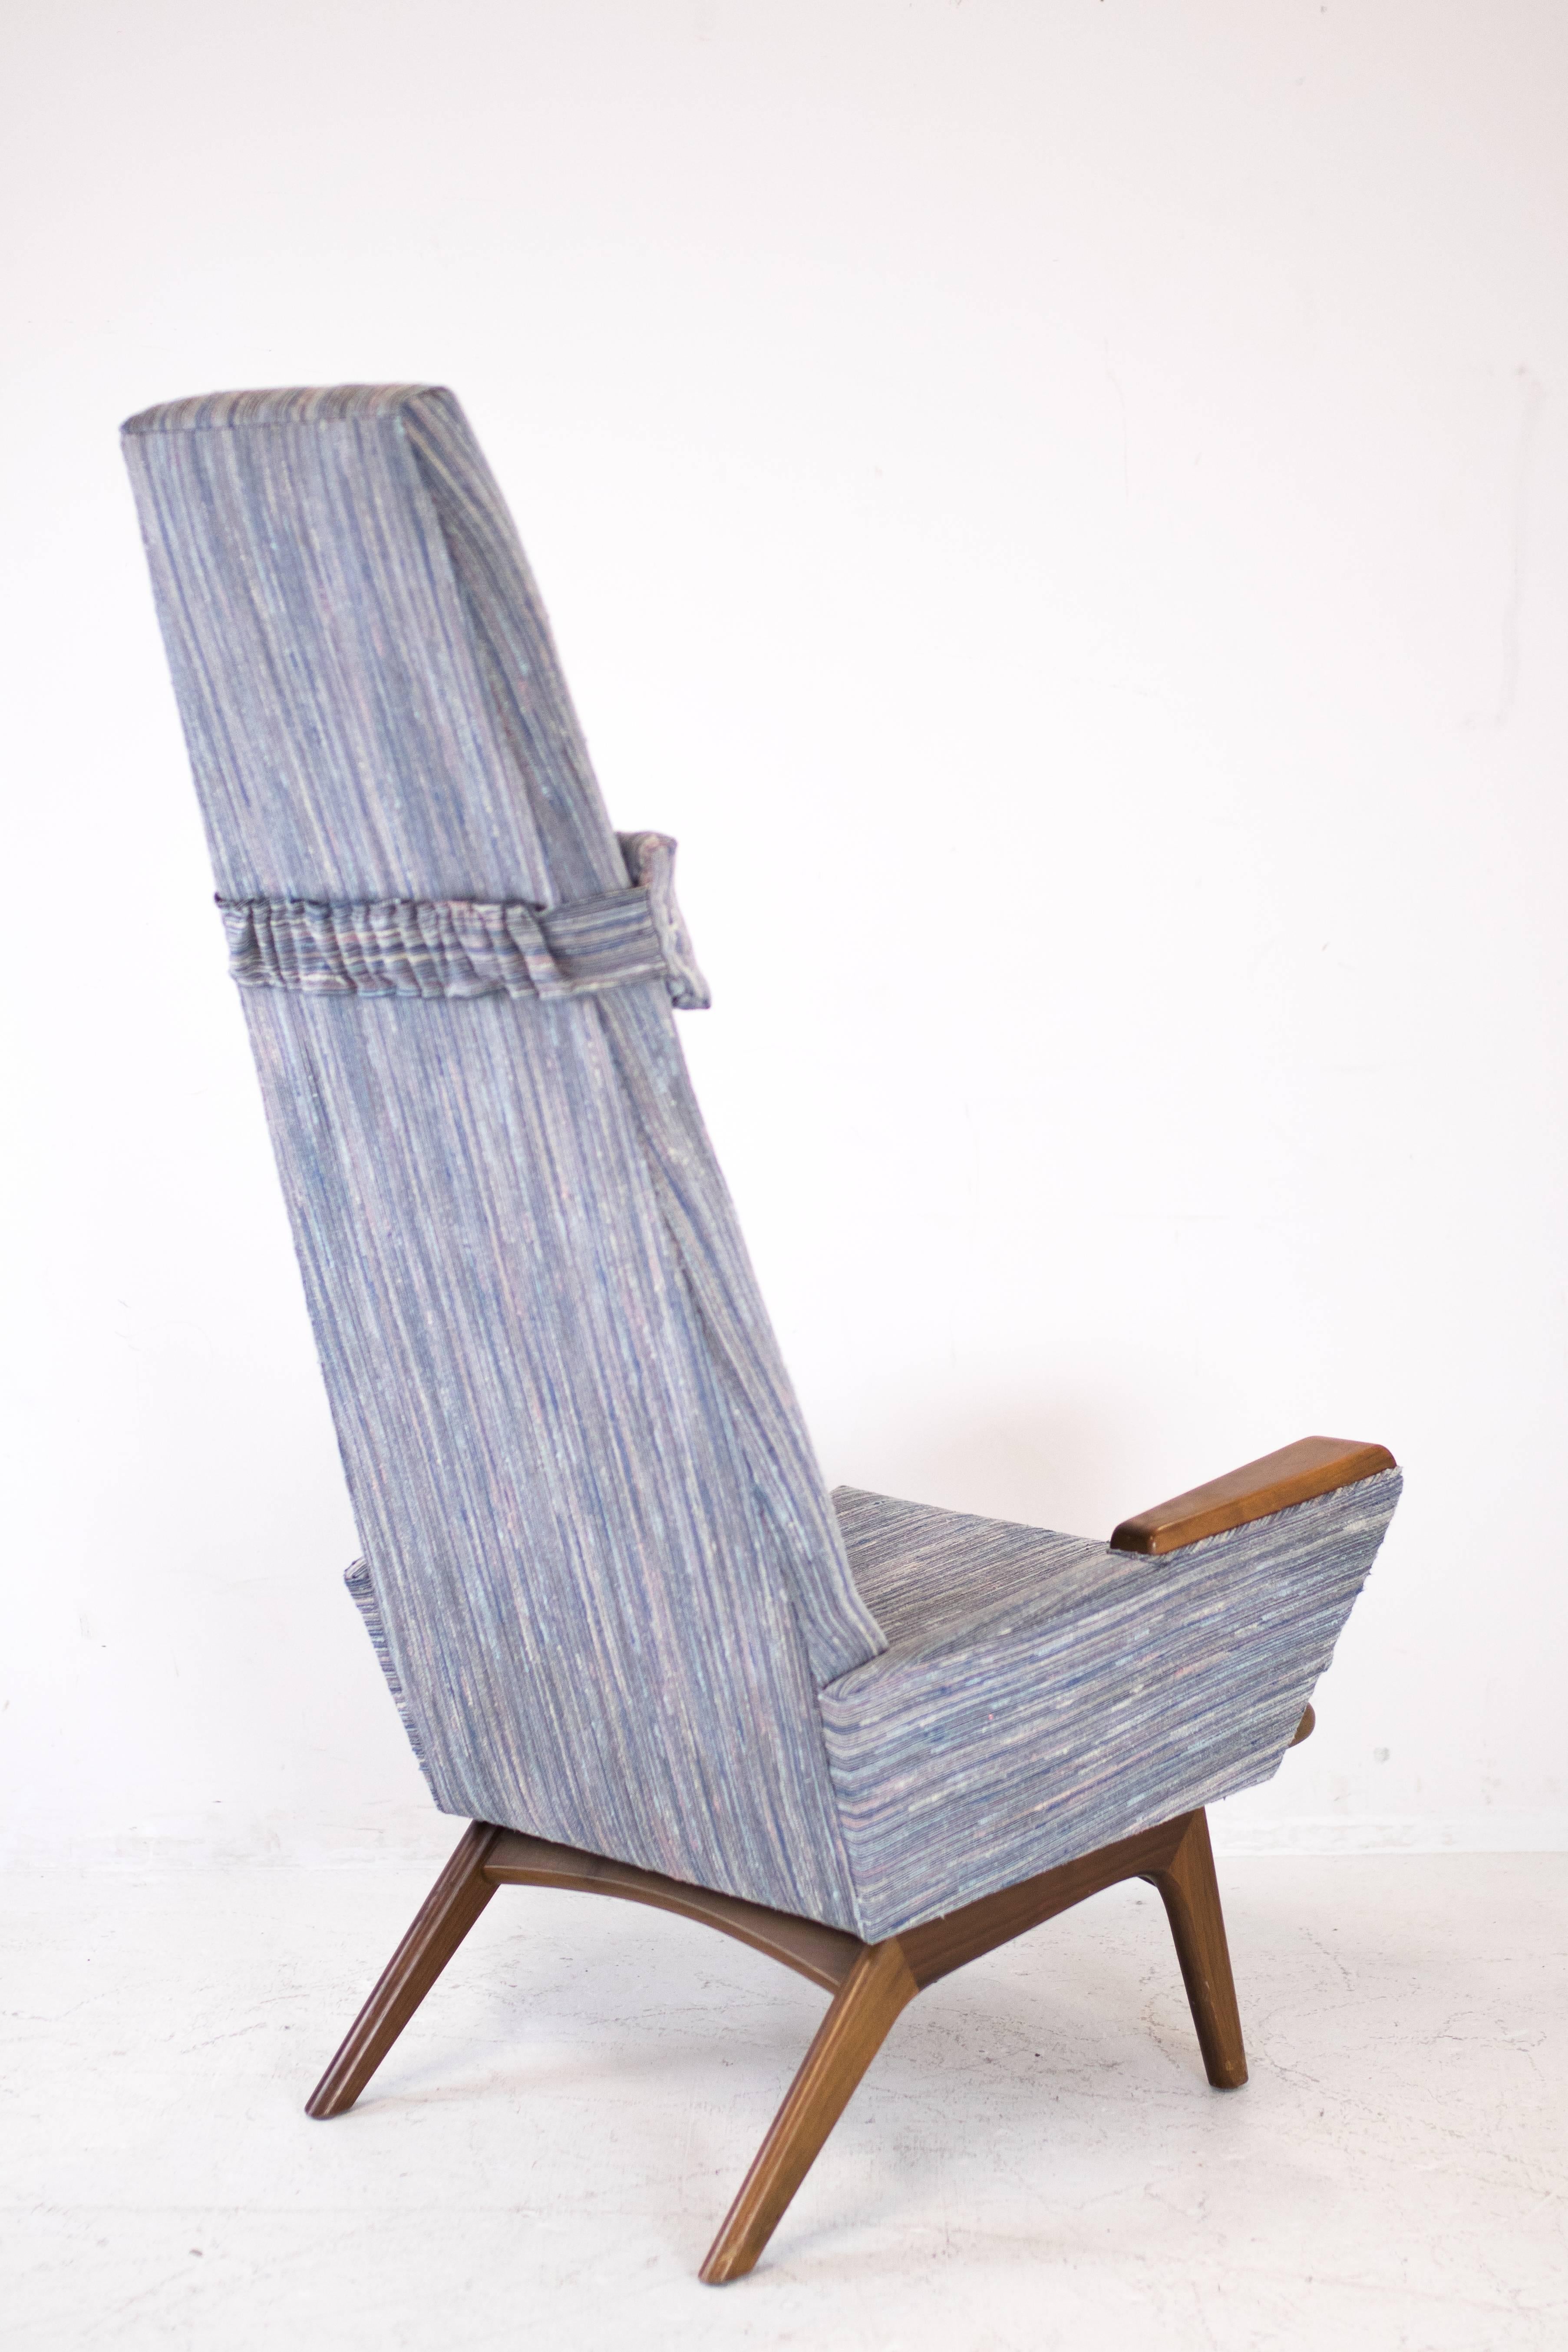 20th Century Pair of Slim Jim Lounge Chairs by Adrian Pearsall for Craft Associates